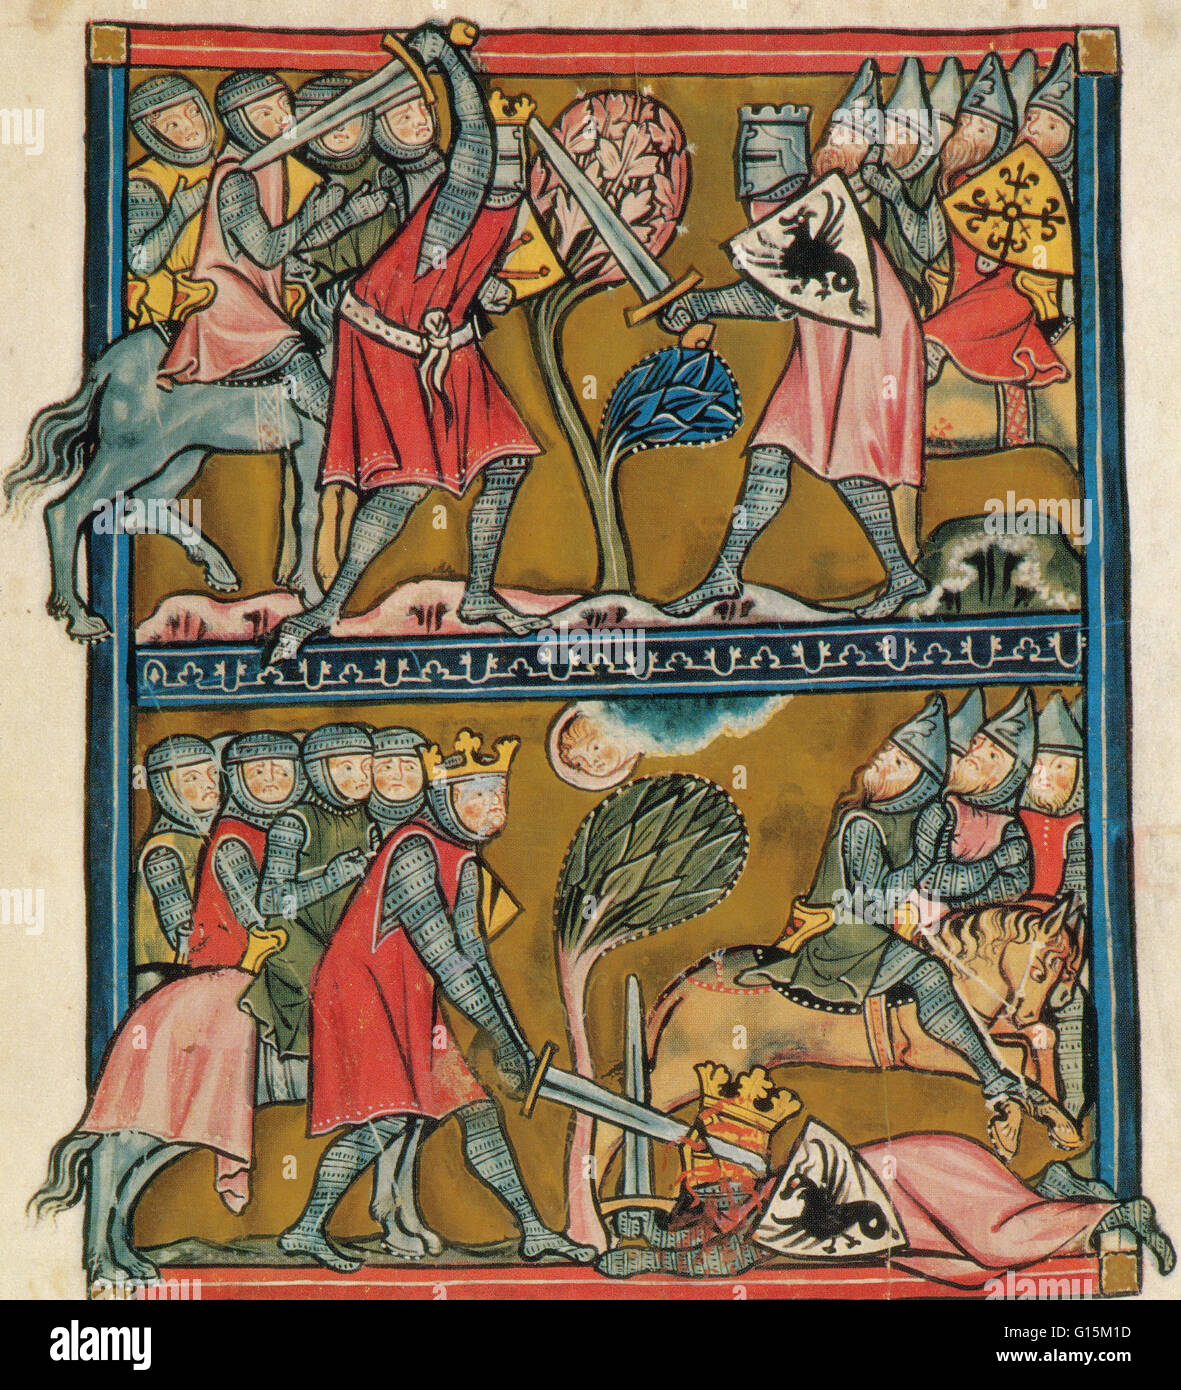 Spurred by an angel Charlemagne beats Baligant the Emir of Babylon; miniature in a manuscript of about 1290. The Song of Roland (La Chanson de Roland) is a heroic poem based on the Battle of Roncesvalles in 778, during the reign of Charlemagne. It is the Stock Photo